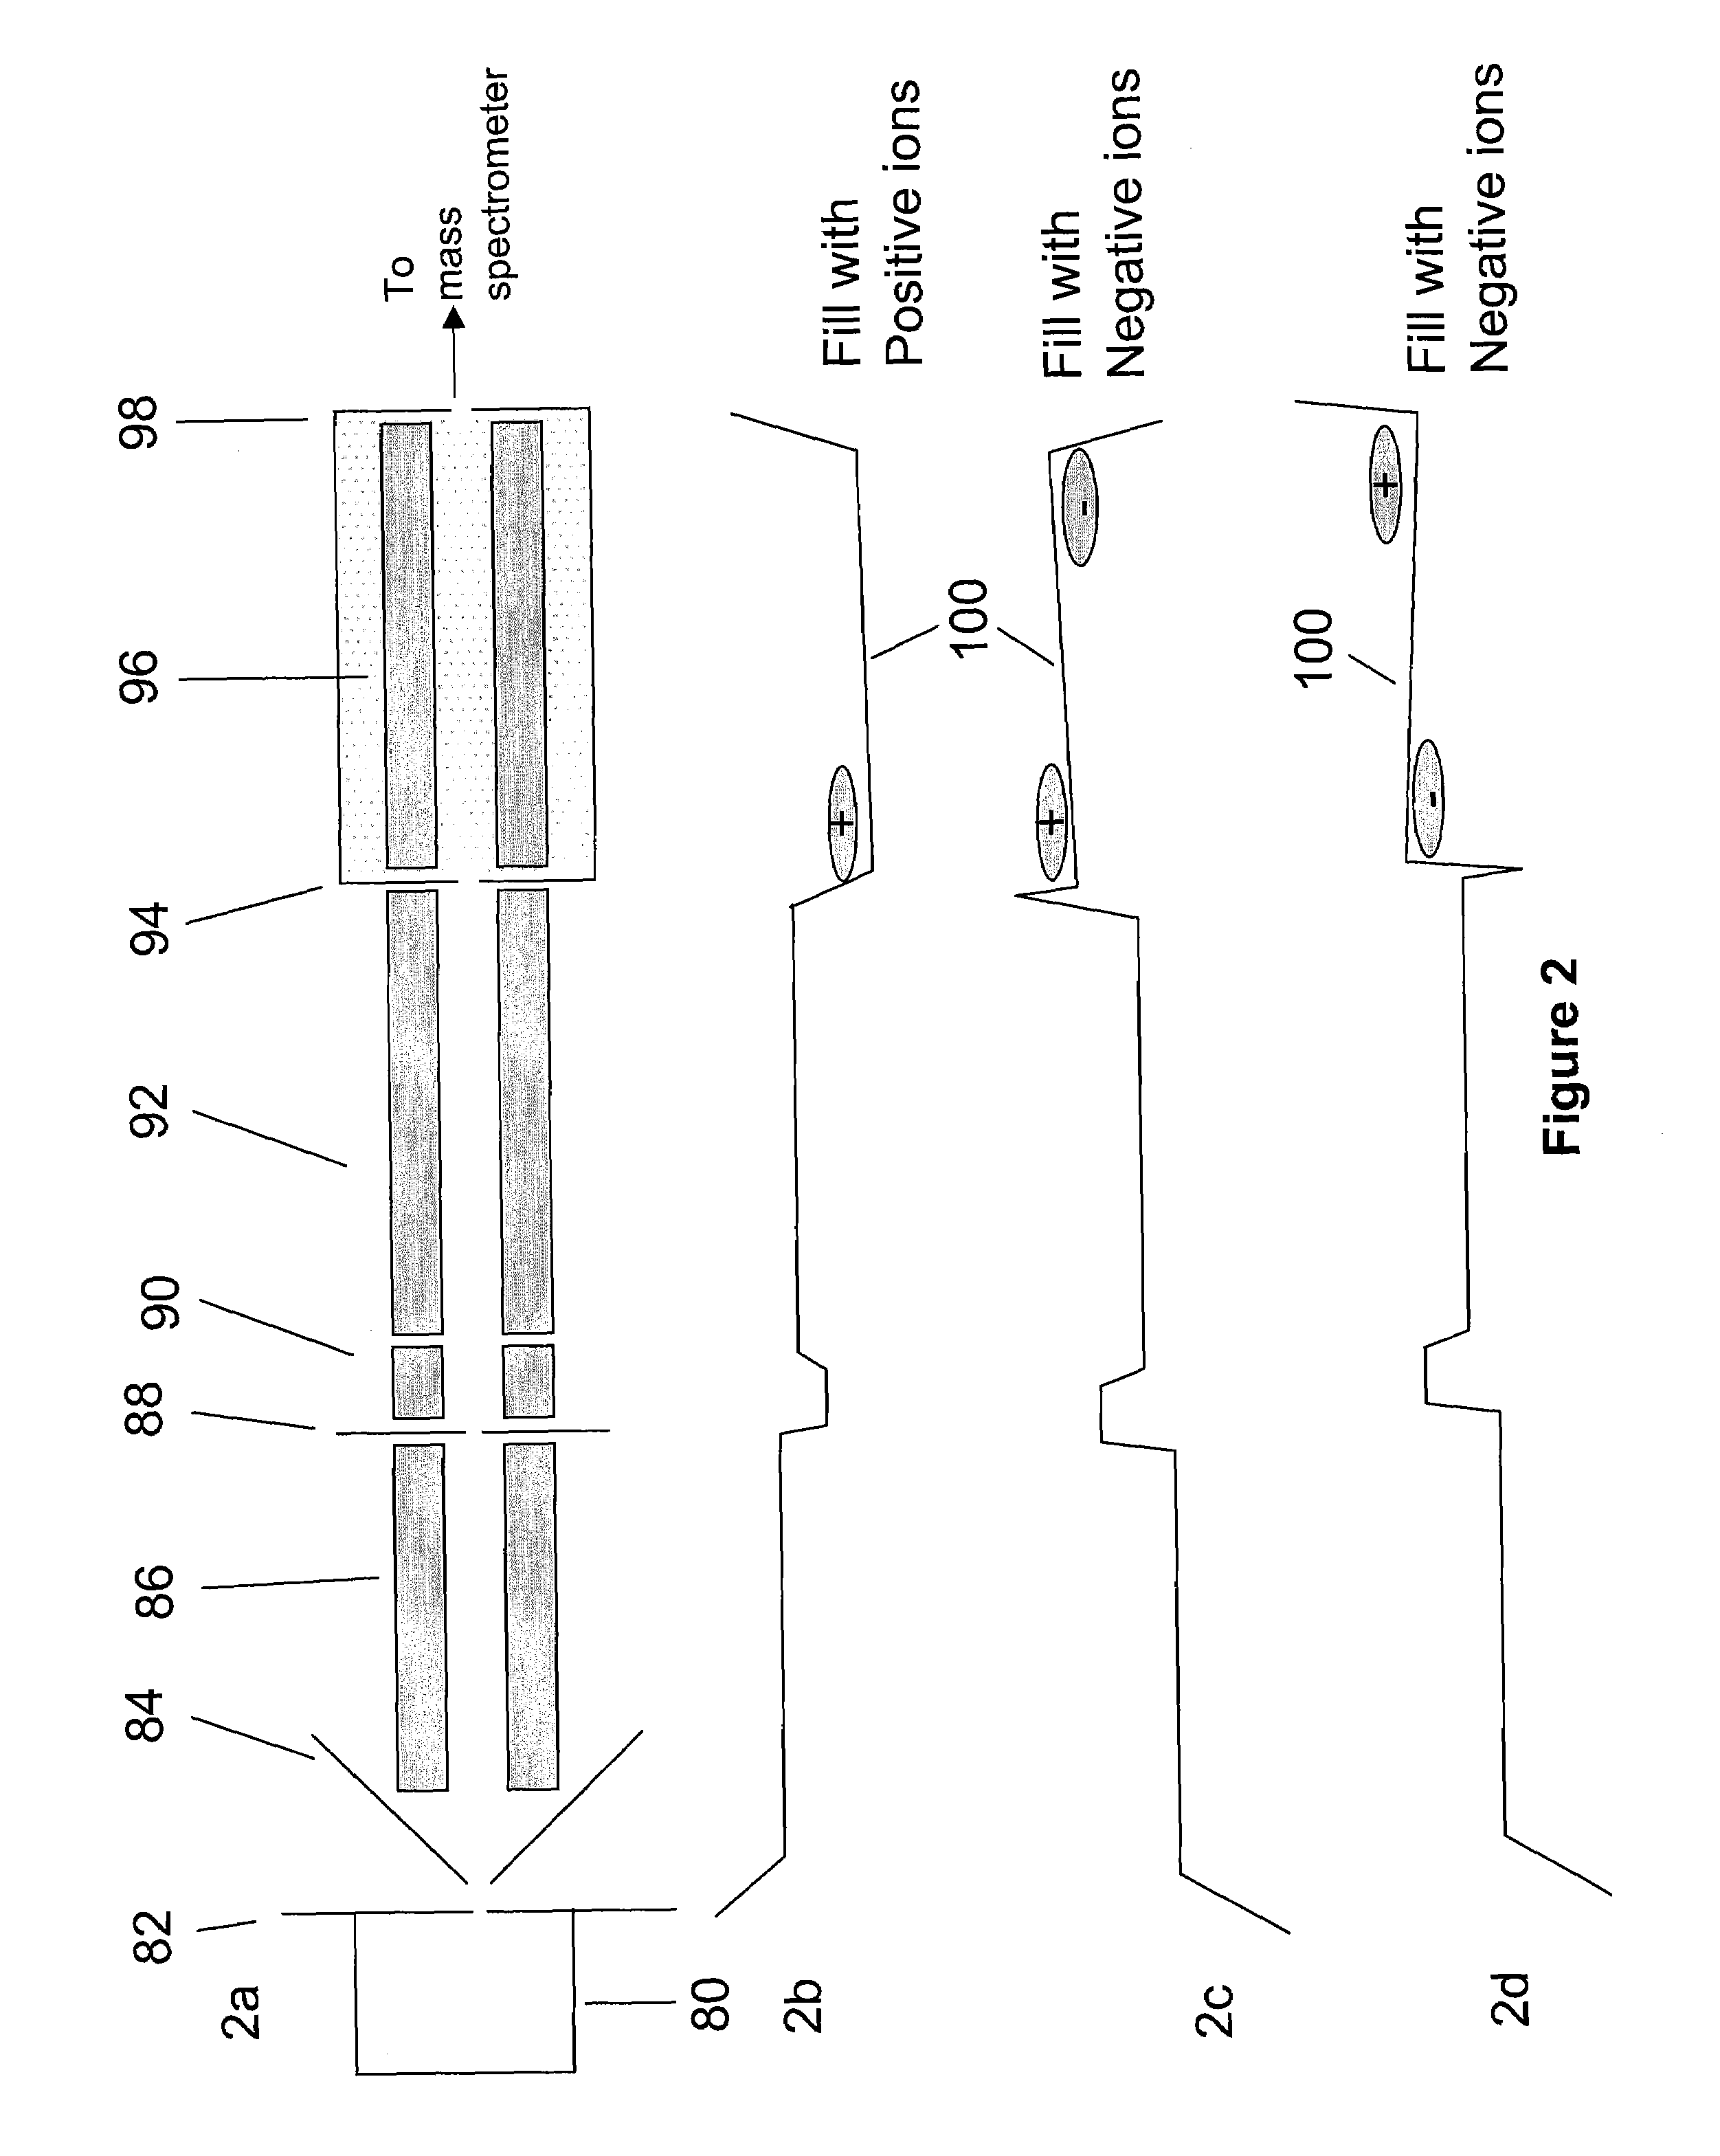 Method for storing and reacting ions in a mass spectrometer